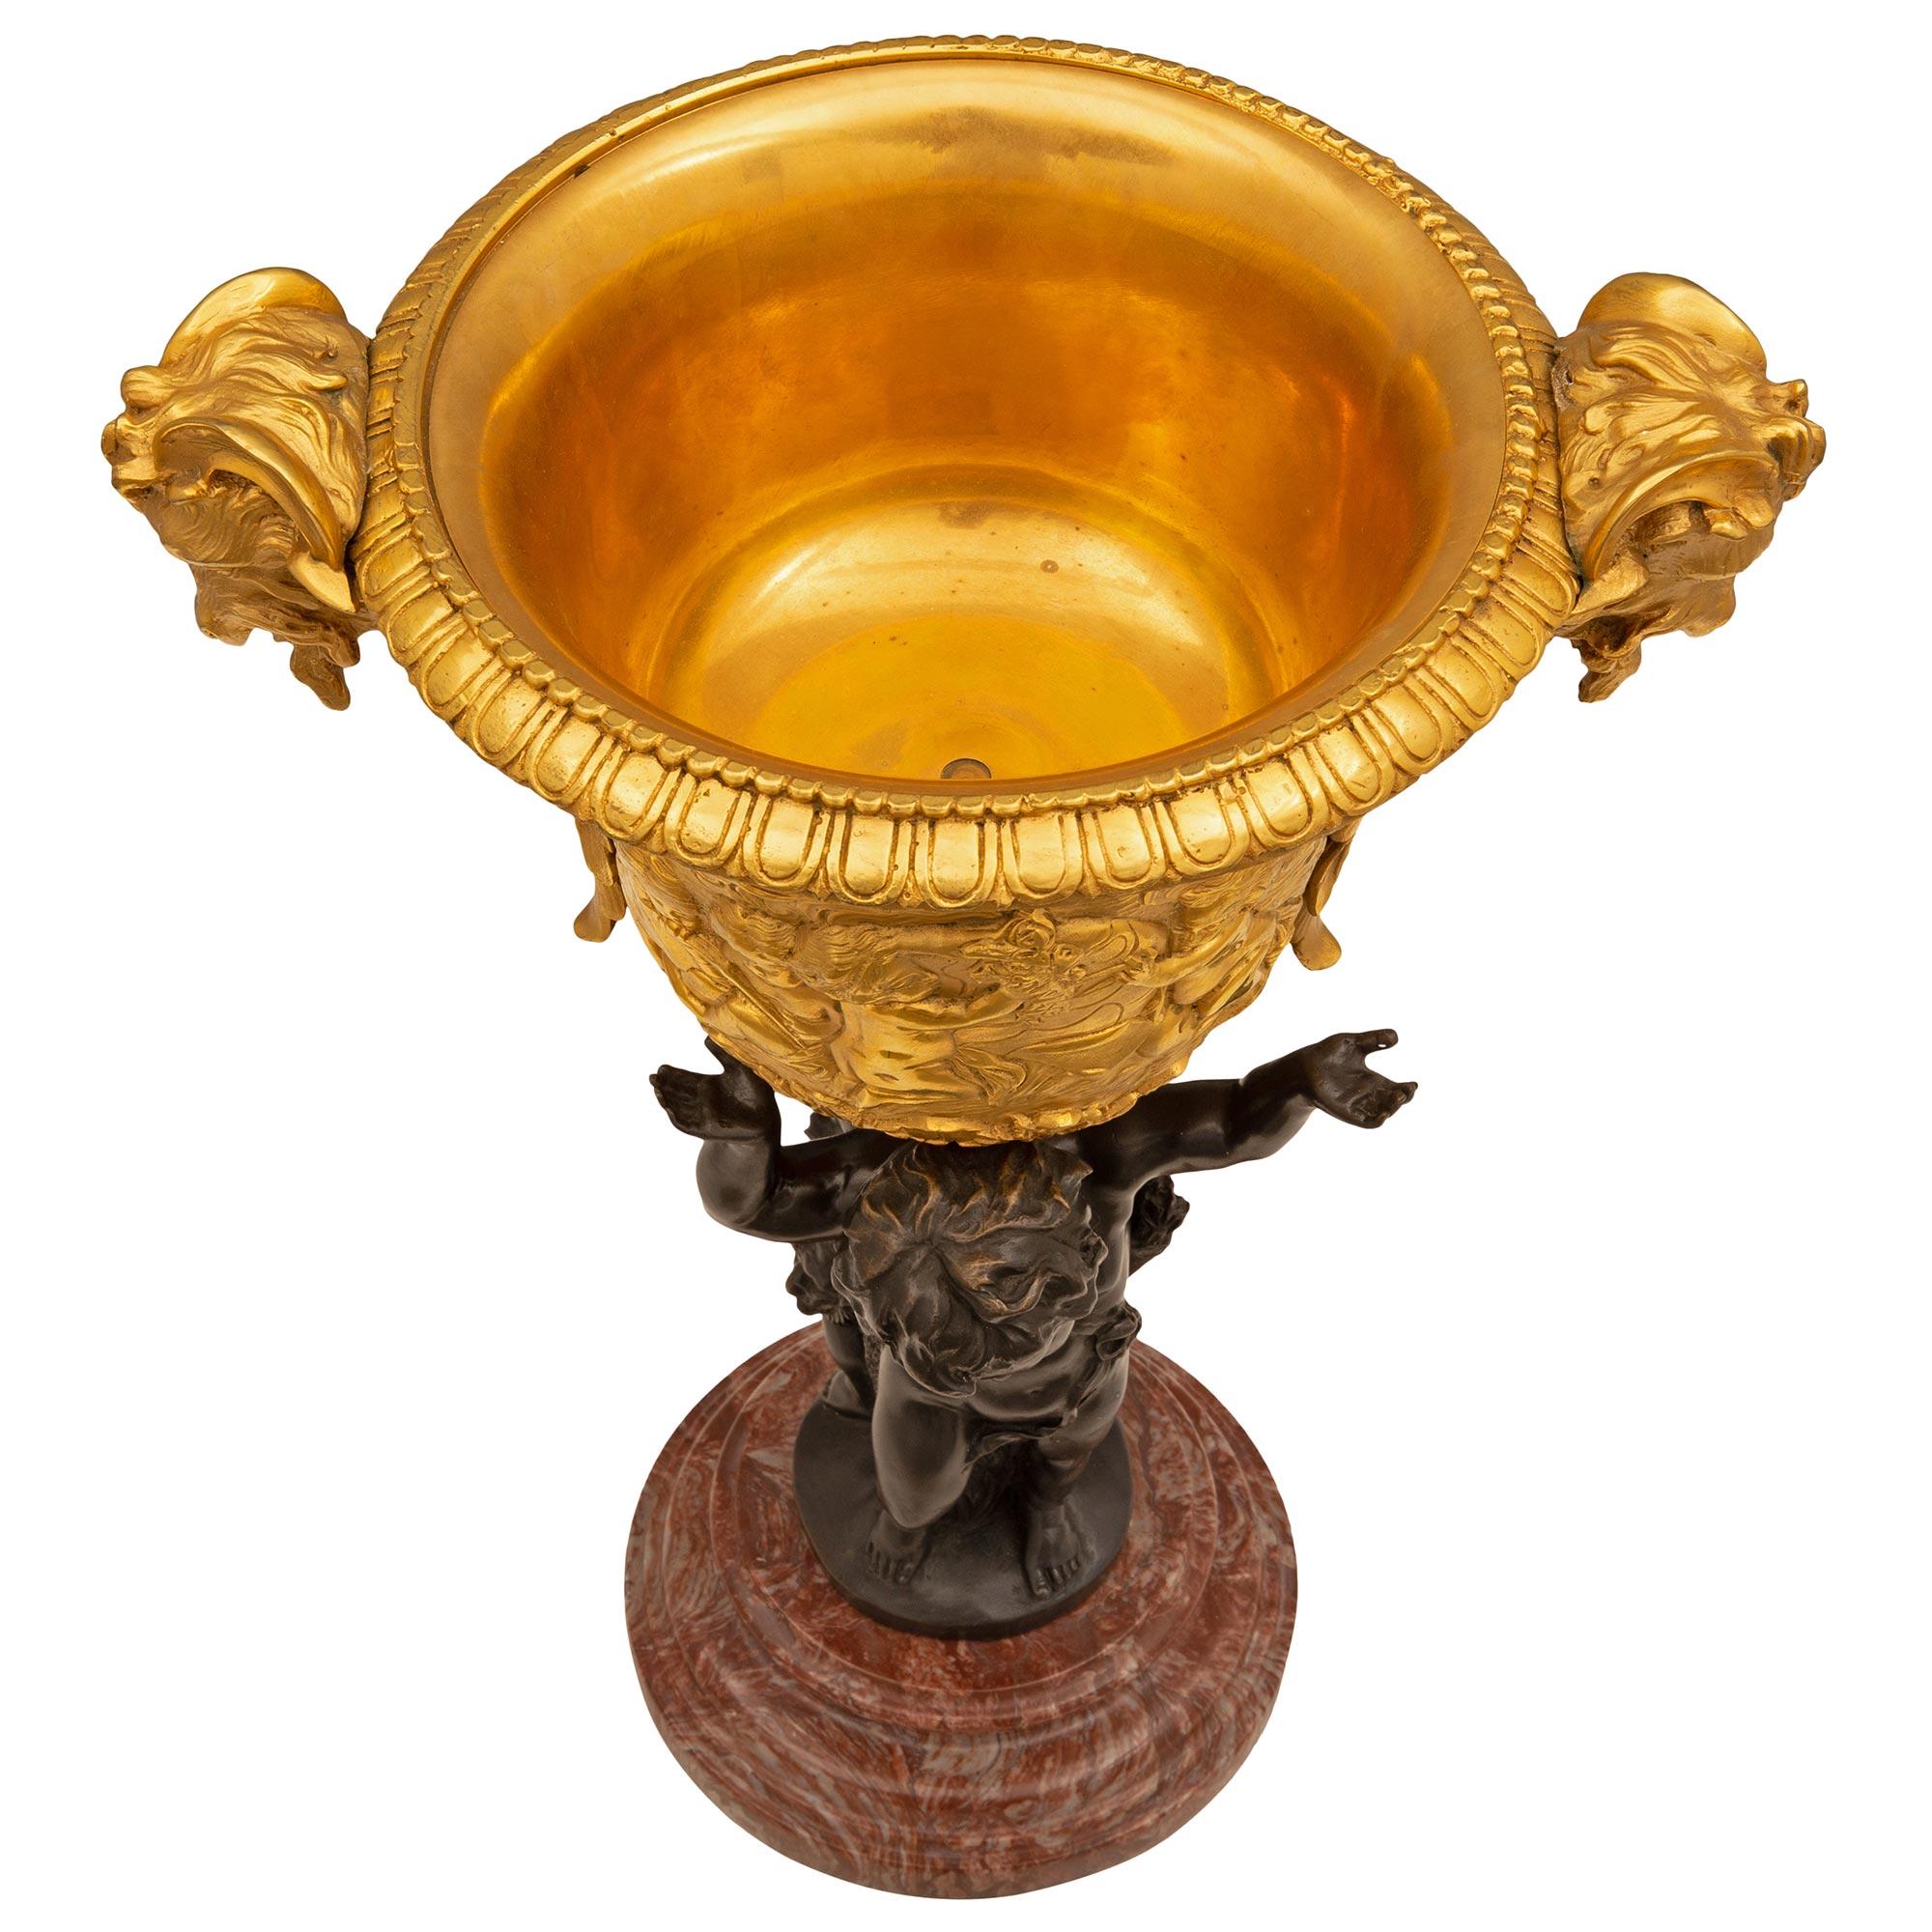 A remarkable and most charming French 19th century Louis XVI st. ormolu, patinated bronze, and Rose Vif des Pyrénées marble centerpiece. The centerpiece is raised by an elegant circular Rose Vif des Pyrénées marble base with a fine stepped mottled